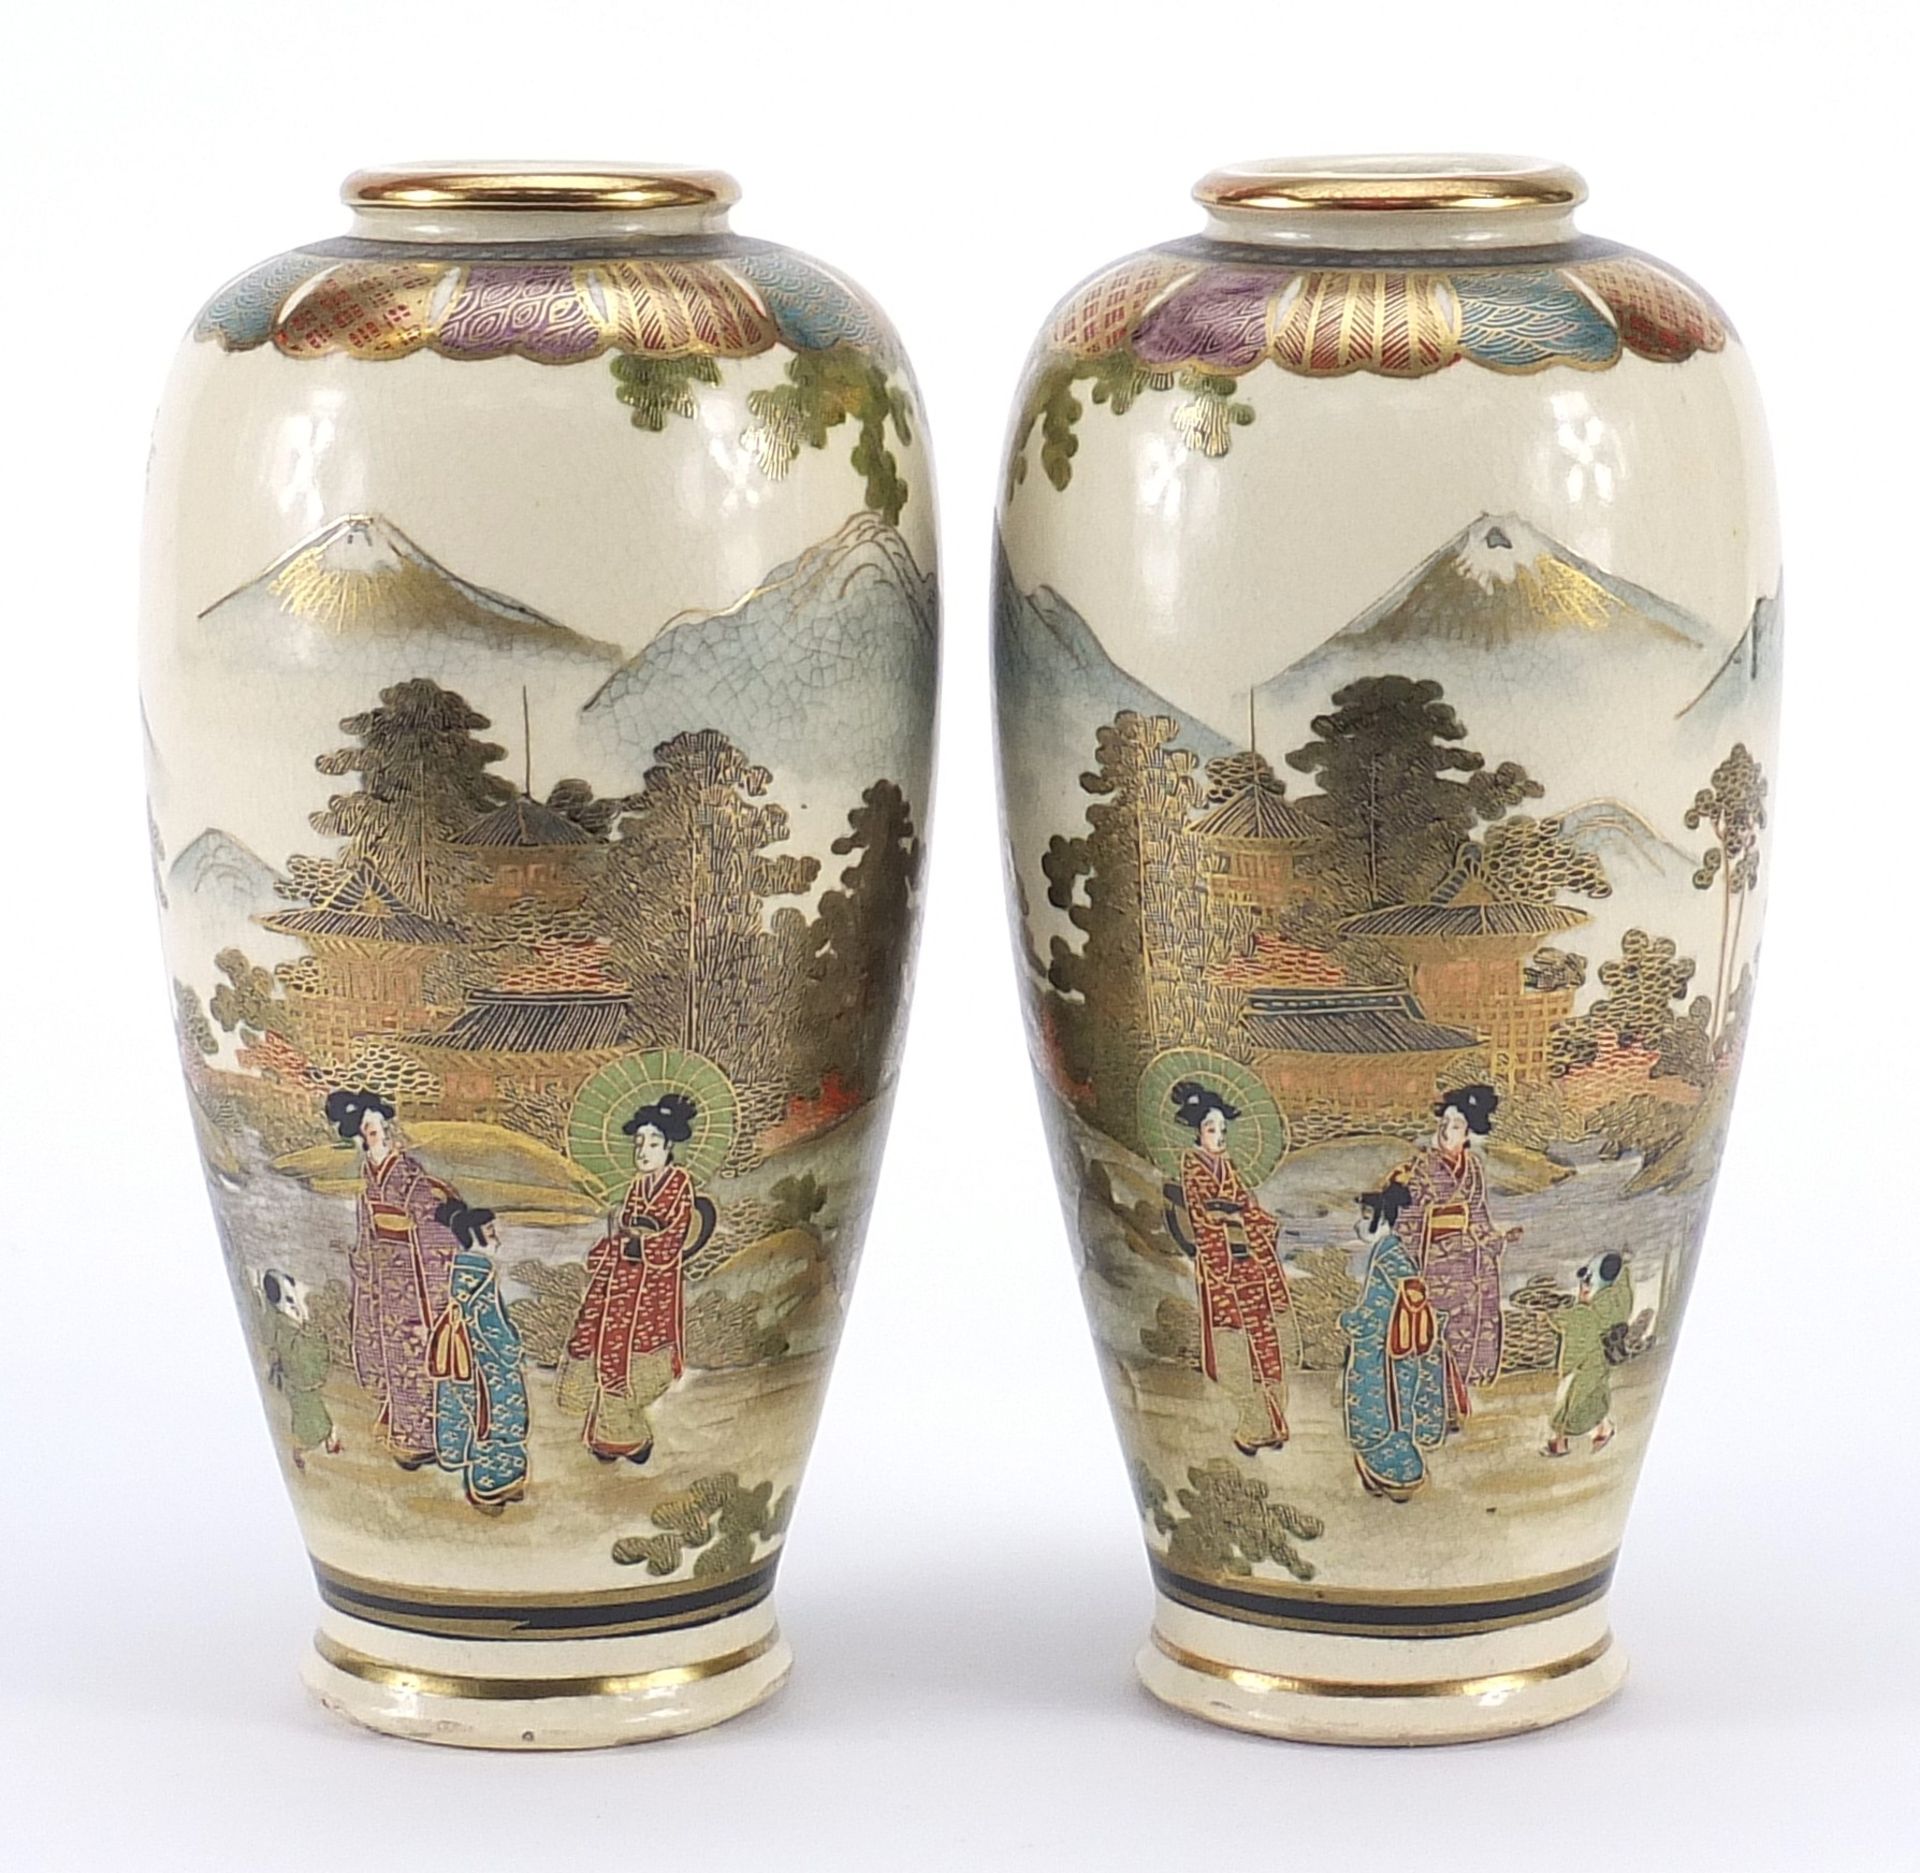 Pair of Japanese Satsuma pottery vases hand painted with Geishas in landscapes, character marks to